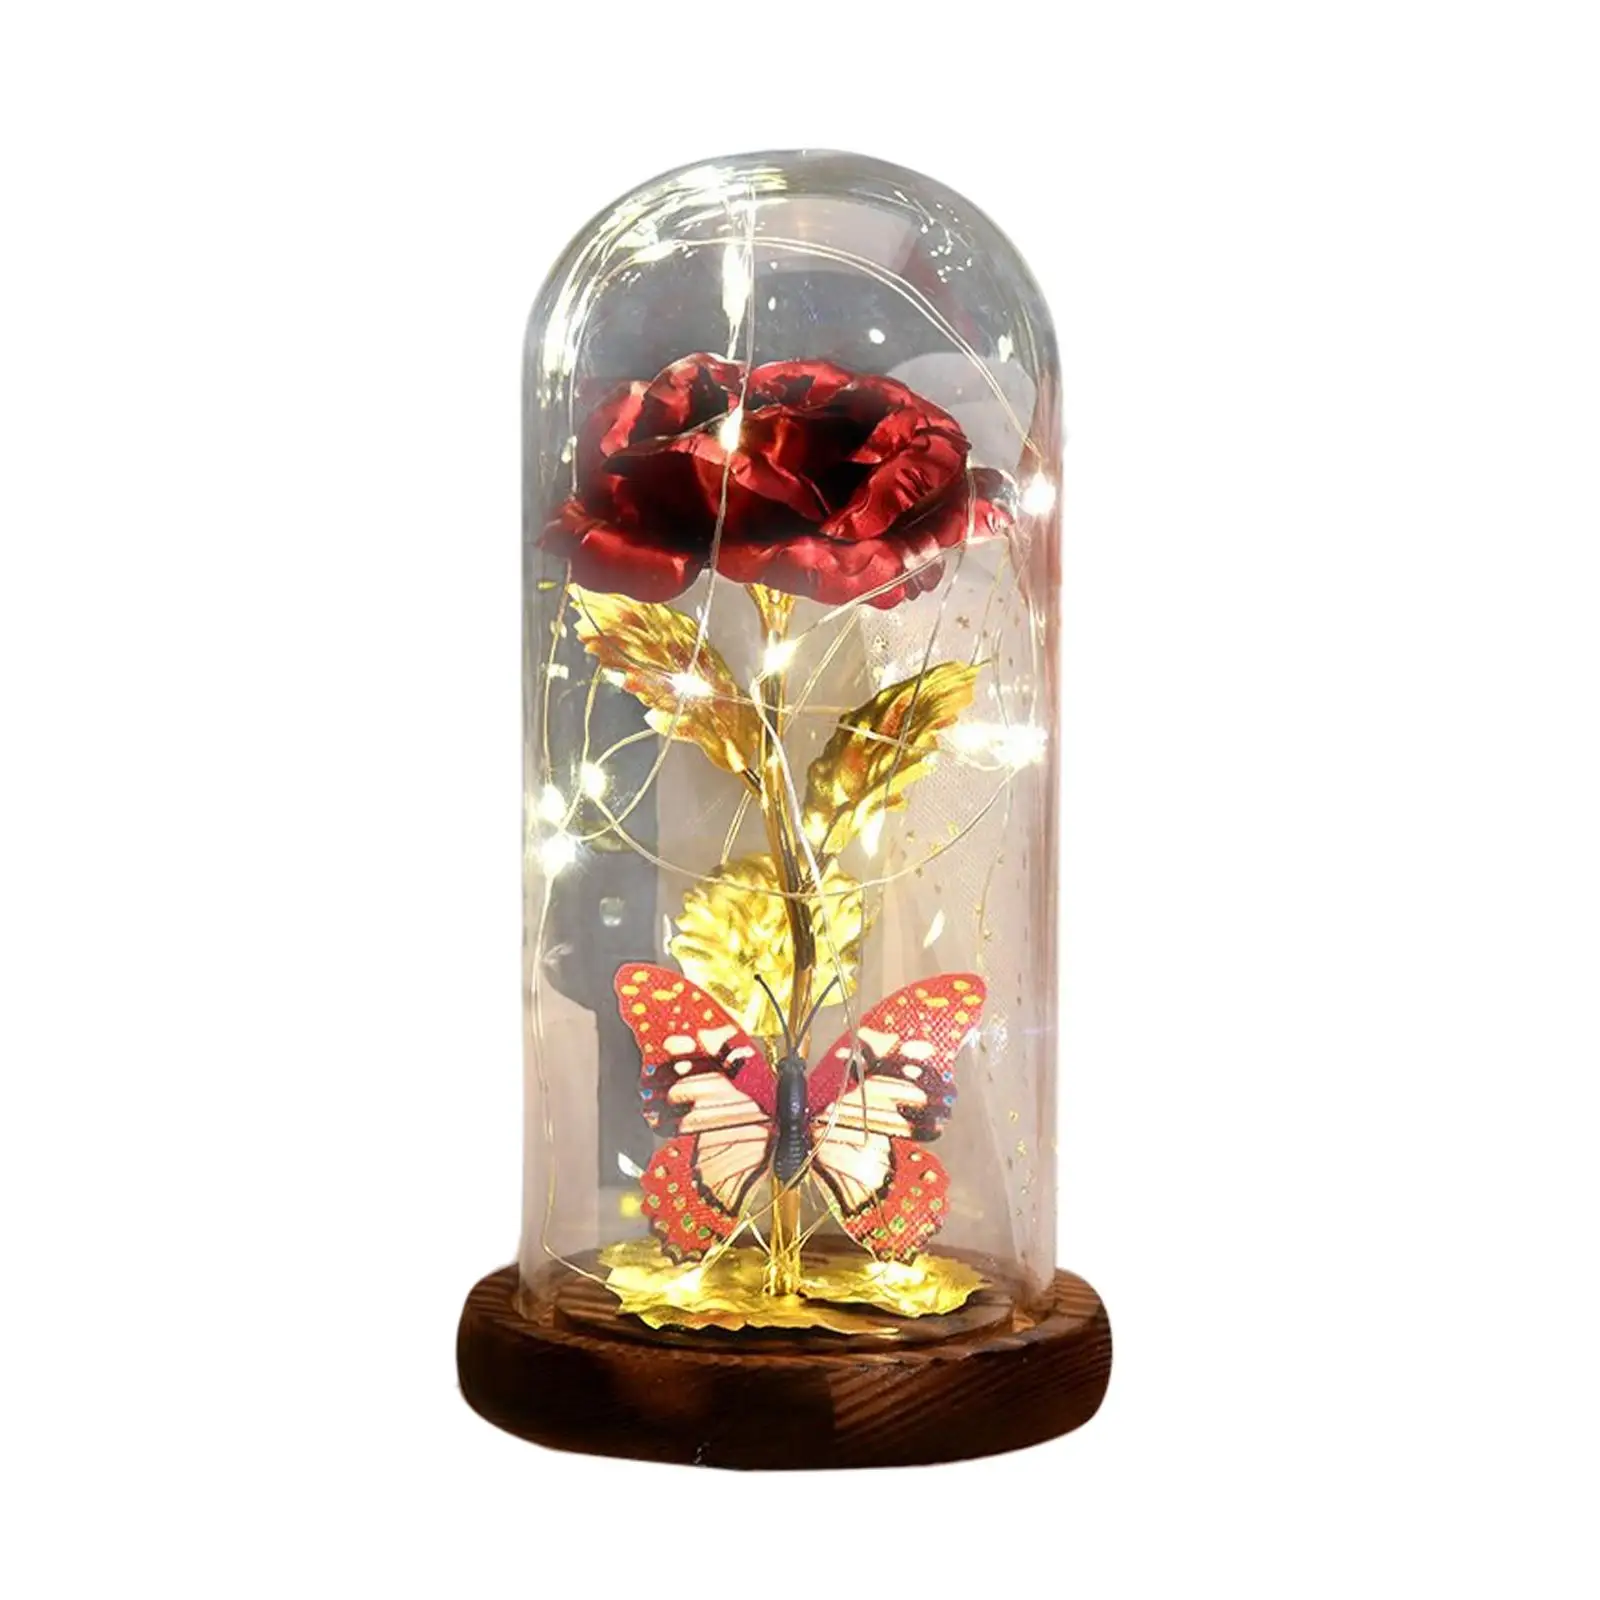 Butterfly Rose Flower Ornaments Glass Cover Crafts Decorative LED Light for Cabinet Living Room Desk Birthday Decorations